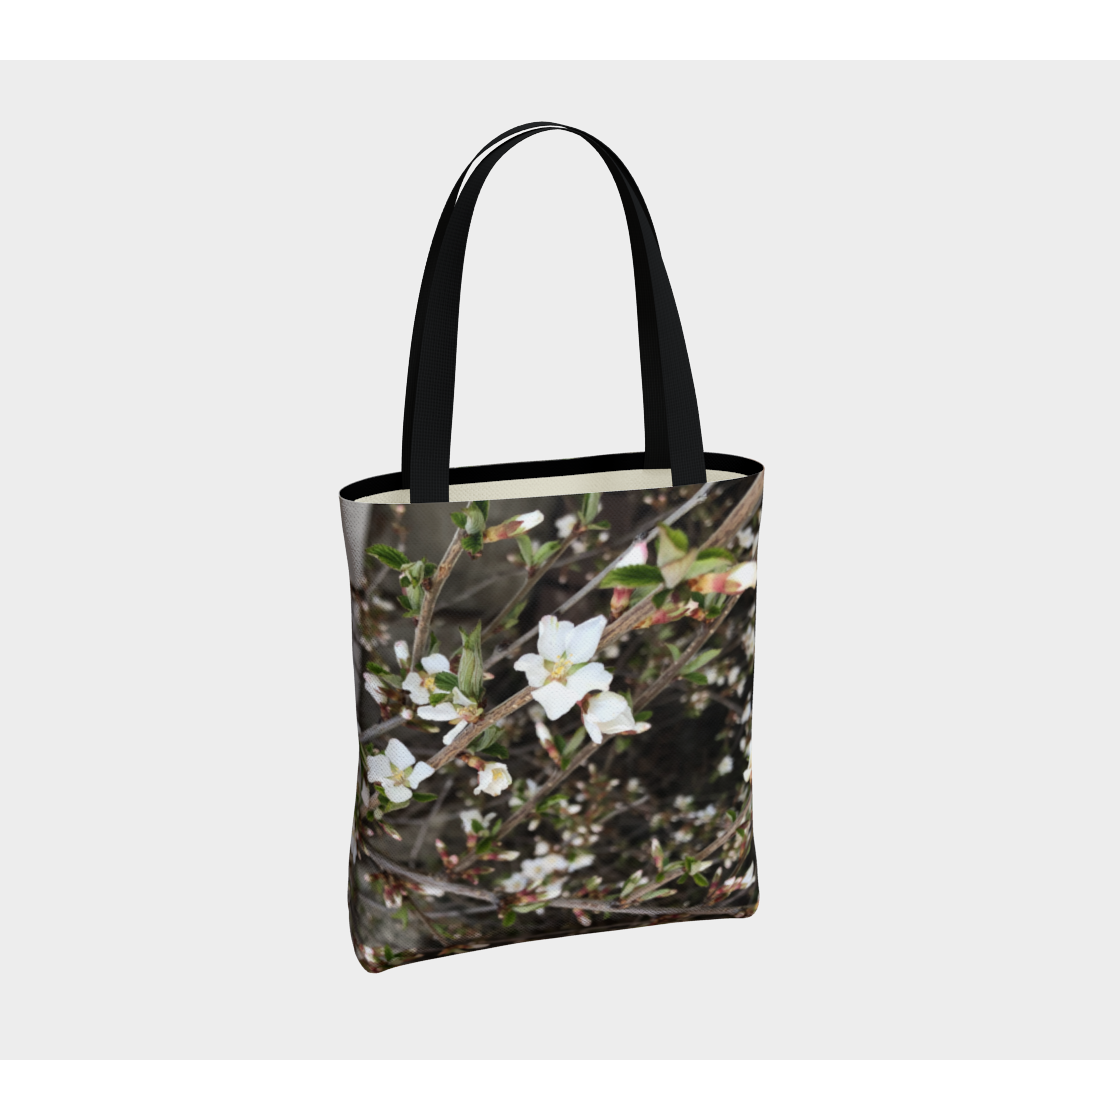 Tote Bag for Women with: Flowery Tree Design, Inside Peak